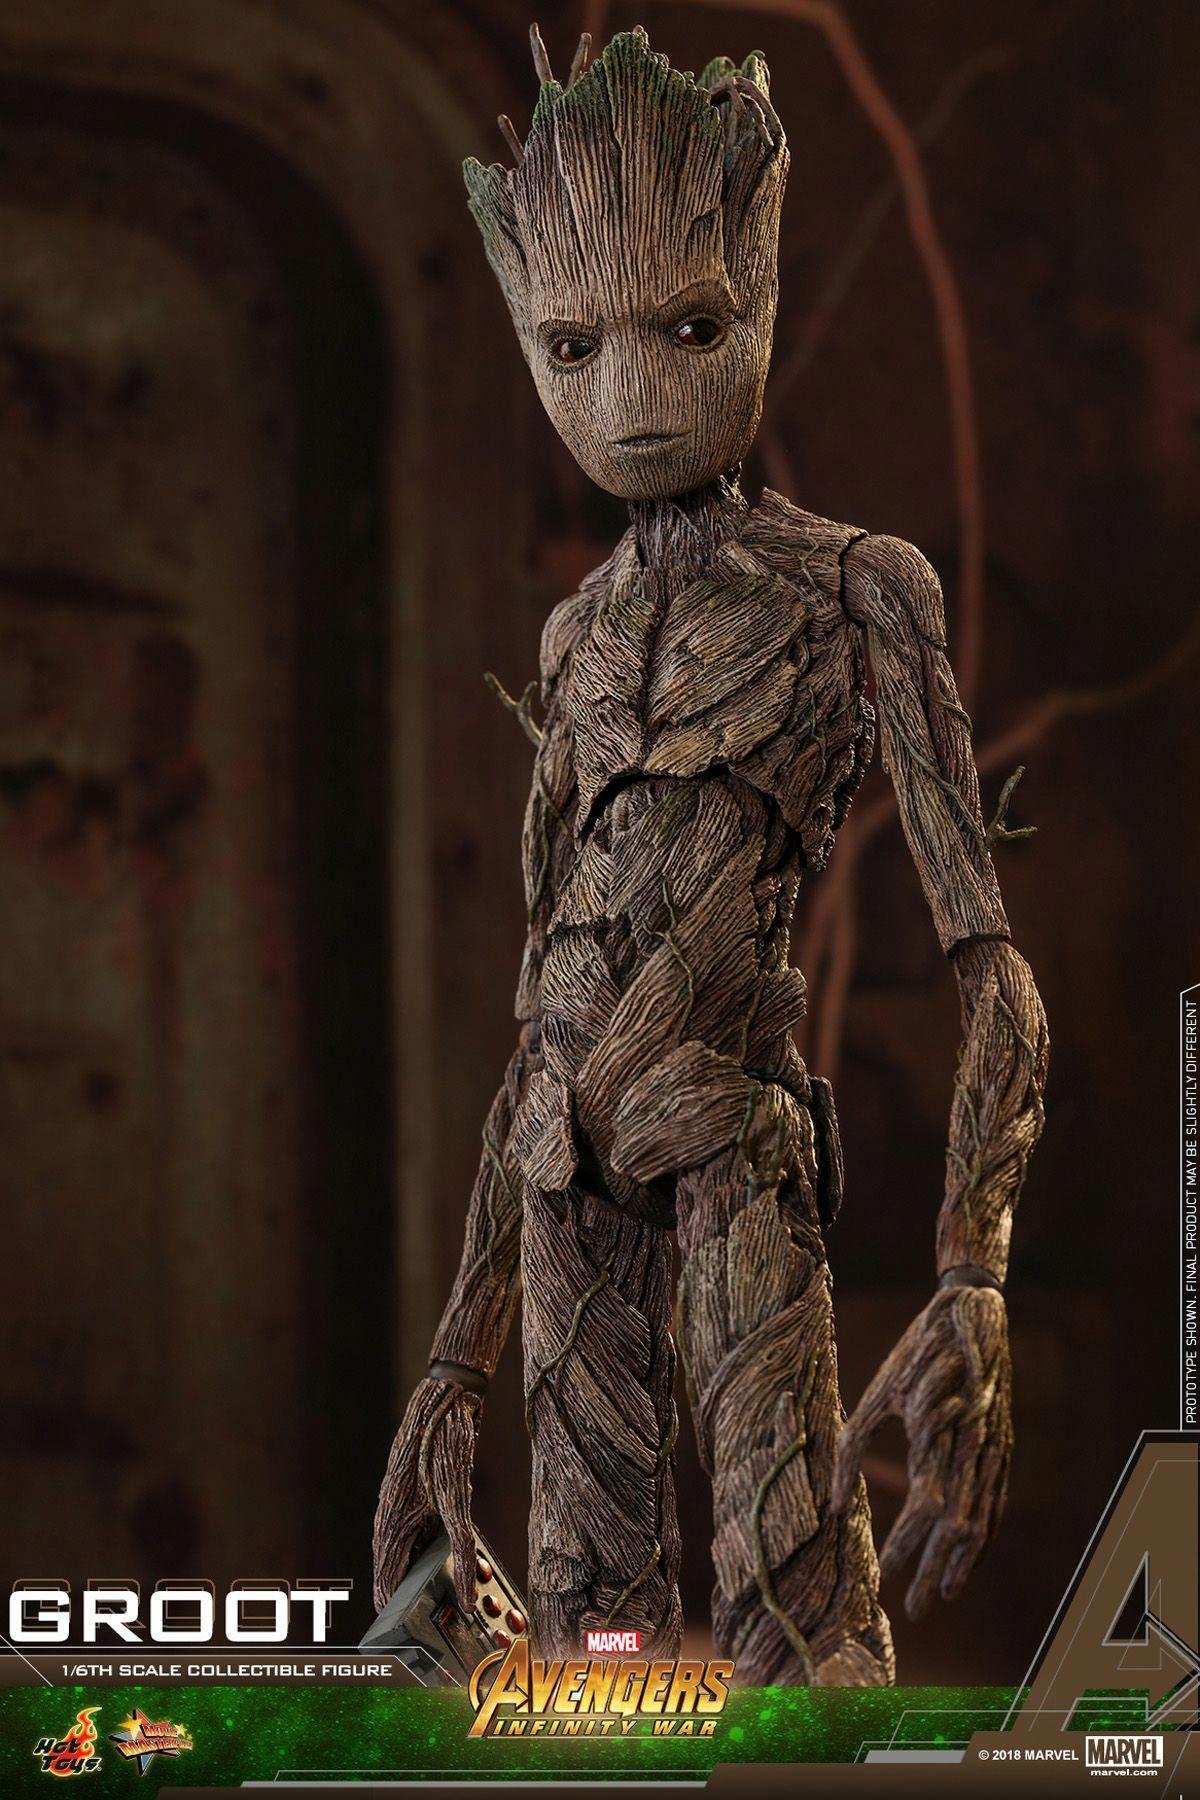 Teenage Groot and Rocket Hot Toys Revealed #toyroketcollection. Toy